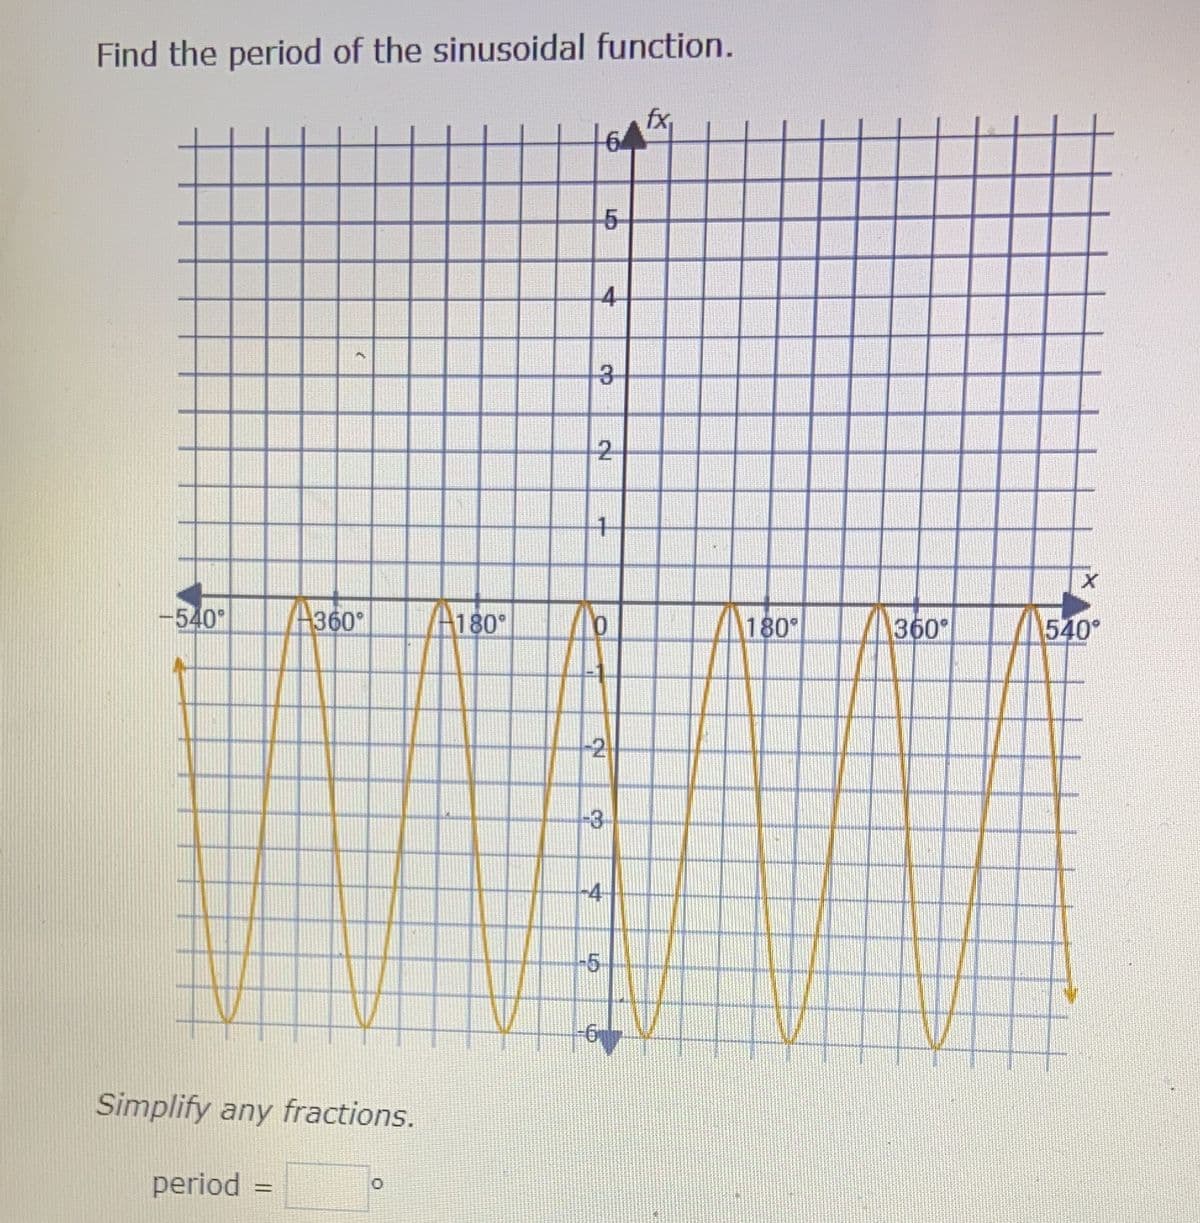 Find the period of the sinusoidal function.
fx
64
15-
4
2-
-540°
A360°
A180
180°
360
540°
-2
-3
-4-
-5-
Simplify any fractions.
period
%3D
